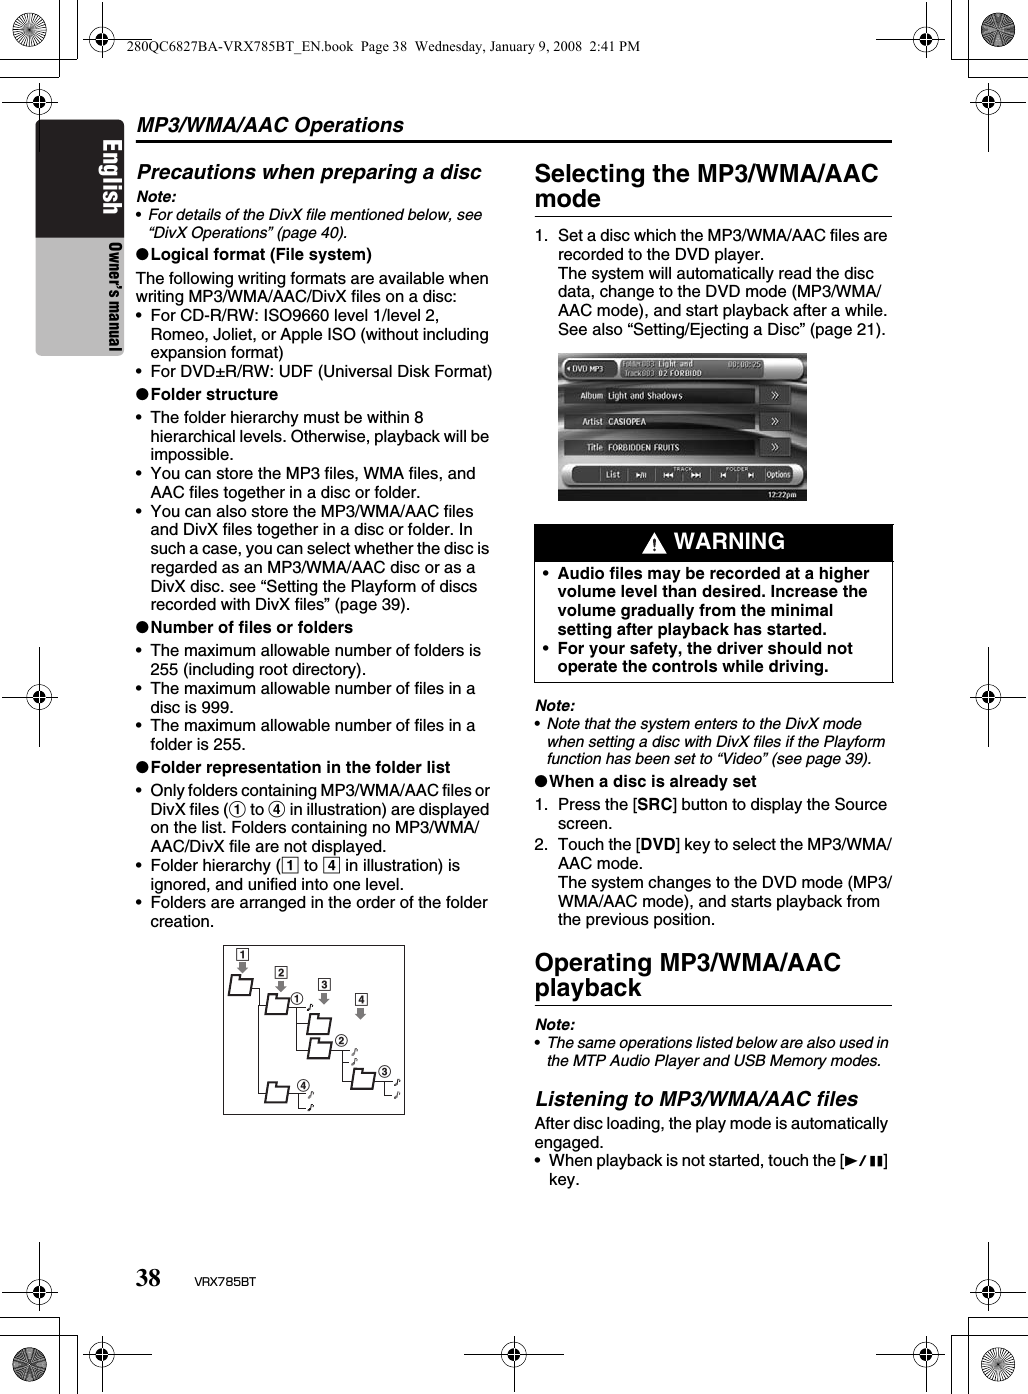 MP3/WMA/AAC Operations38 VRX785BTEnglish Owner’s manualPrecautions when preparing a discNote:•For details of the DivX file mentioned below, see “DivX Operations” (page 40).●Logical format (File system)The following writing formats are available when writing MP3/WMA/AAC/DivX files on a disc:• For CD-R/RW: ISO9660 level 1/level 2, Romeo, Joliet, or Apple ISO (without including expansion format)• For DVD±R/RW: UDF (Universal Disk Format)●Folder structure• The folder hierarchy must be within 8 hierarchical levels. Otherwise, playback will be impossible.• You can store the MP3 files, WMA files, and AAC files together in a disc or folder.• You can also store the MP3/WMA/AAC files and DivX files together in a disc or folder. In such a case, you can select whether the disc is regarded as an MP3/WMA/AAC disc or as a DivX disc. see “Setting the Playform of discs recorded with DivX files” (page 39).●Number of files or folders• The maximum allowable number of folders is 255 (including root directory).• The maximum allowable number of files in a disc is 999.• The maximum allowable number of files in a folder is 255.●Folder representation in the folder list• Only folders containing MP3/WMA/AAC files or DivX files (1 to 4 in illustration) are displayed on the list. Folders containing no MP3/WMA/AAC/DivX file are not displayed.• Folder hierarchy (1 to 4 in illustration) is ignored, and unified into one level.• Folders are arranged in the order of the folder creation.Selecting the MP3/WMA/AAC mode1. Set a disc which the MP3/WMA/AAC files are recorded to the DVD player.The system will automatically read the disc data, change to the DVD mode (MP3/WMA/AAC mode), and start playback after a while.See also “Setting/Ejecting a Disc” (page 21).Note:•Note that the system enters to the DivX mode when setting a disc with DivX files if the Playform function has been set to “Video” (see page 39).●When a disc is already set1. Press the [SRC] button to display the Source screen.2. Touch the [DVD] key to select the MP3/WMA/AAC mode.The system changes to the DVD mode (MP3/WMA/AAC mode), and starts playback from the previous position.Operating MP3/WMA/AAC playbackNote:•The same operations listed below are also used in the MTP Audio Player and USB Memory modes.Listening to MP3/WMA/AAC filesAfter disc loading, the play mode is automatically engaged.• When playback is not started, touch the [p] key.12123434 WARNING•Audio files may be recorded at a higher volume level than desired. Increase the volume gradually from the minimal setting after playback has started.•For your safety, the driver should not operate the controls while driving.280QC6827BA-VRX785BT_EN.book  Page 38  Wednesday, January 9, 2008  2:41 PM